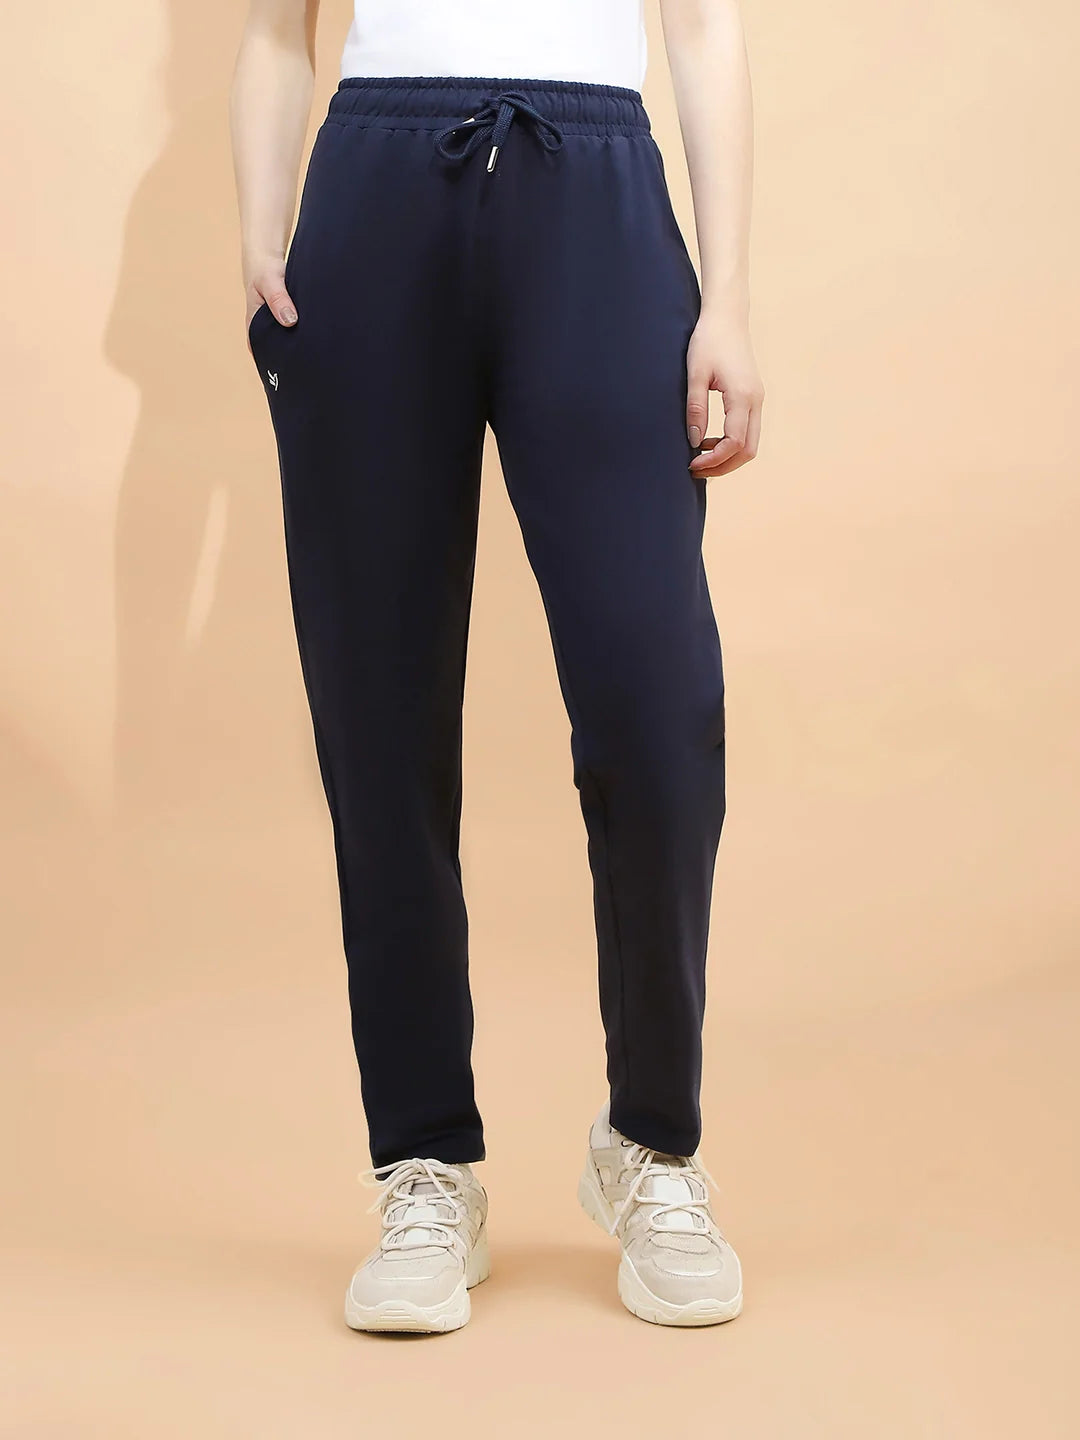 Navy Blue Polycotton Regular Fit Lower For Women